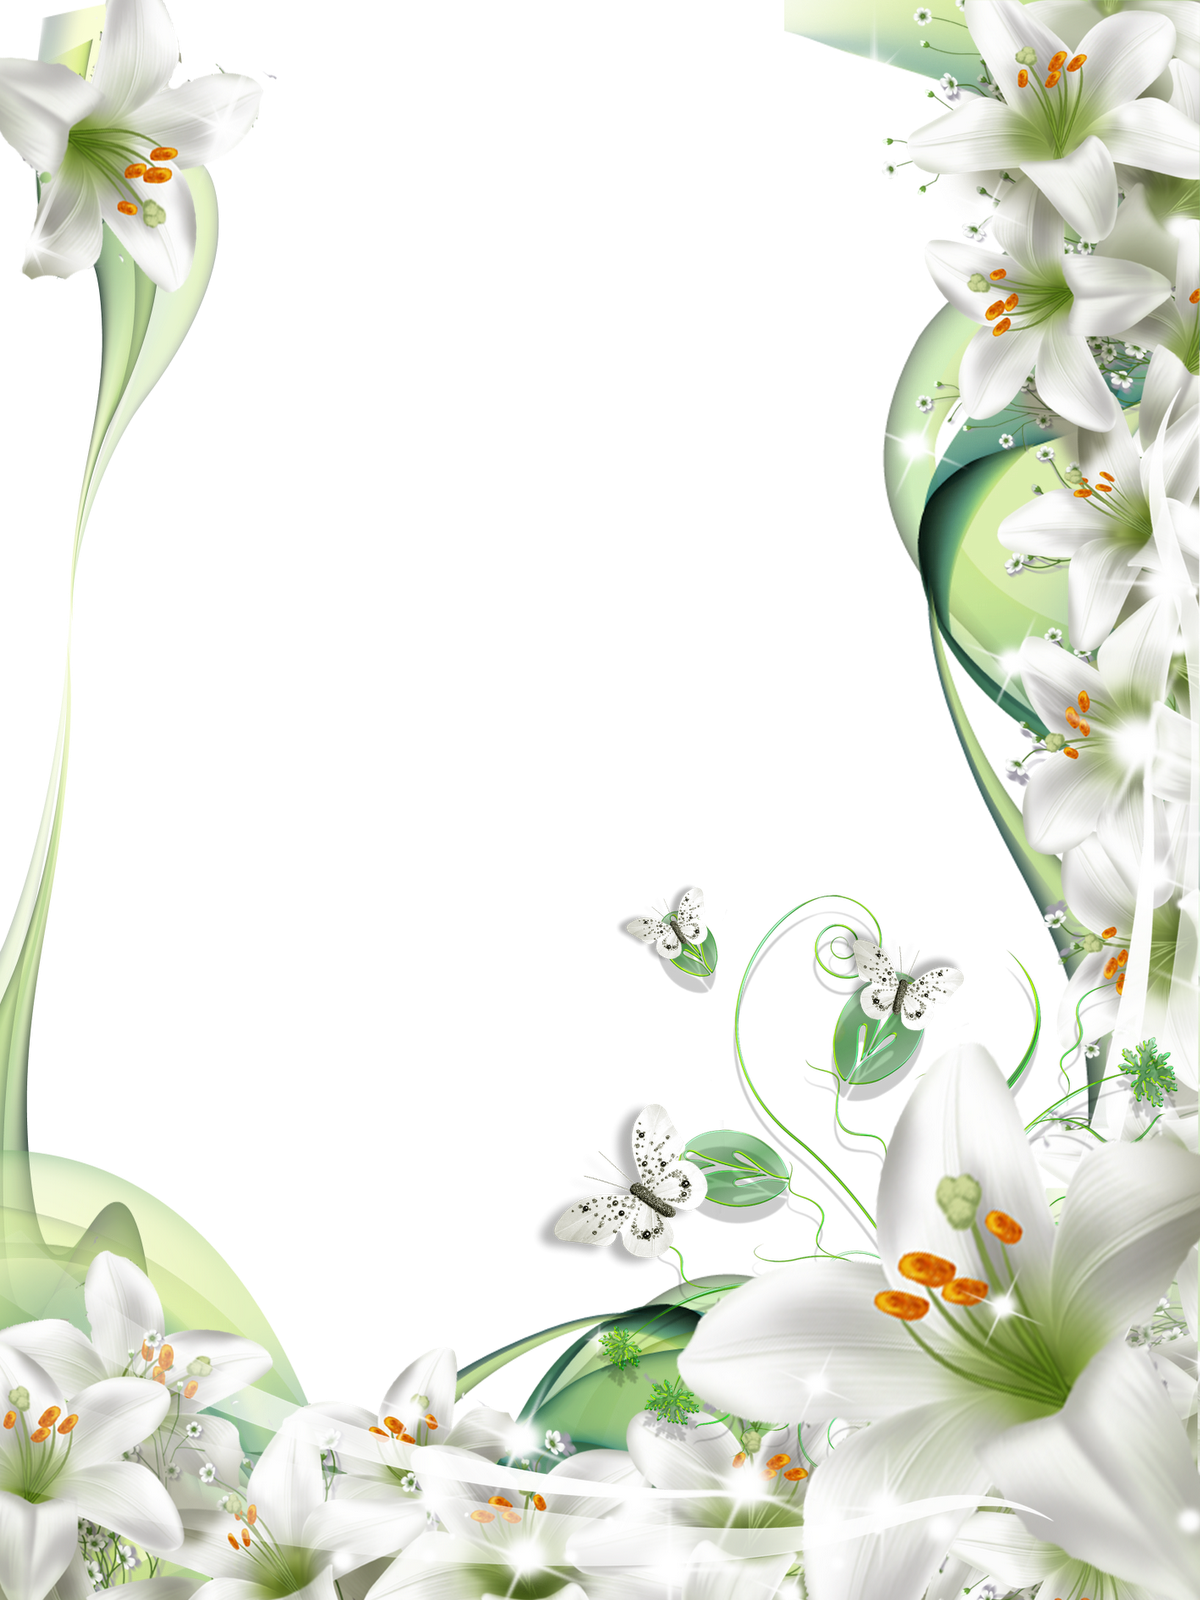 Funeral Vector Frame HQ Image Free PNG Image